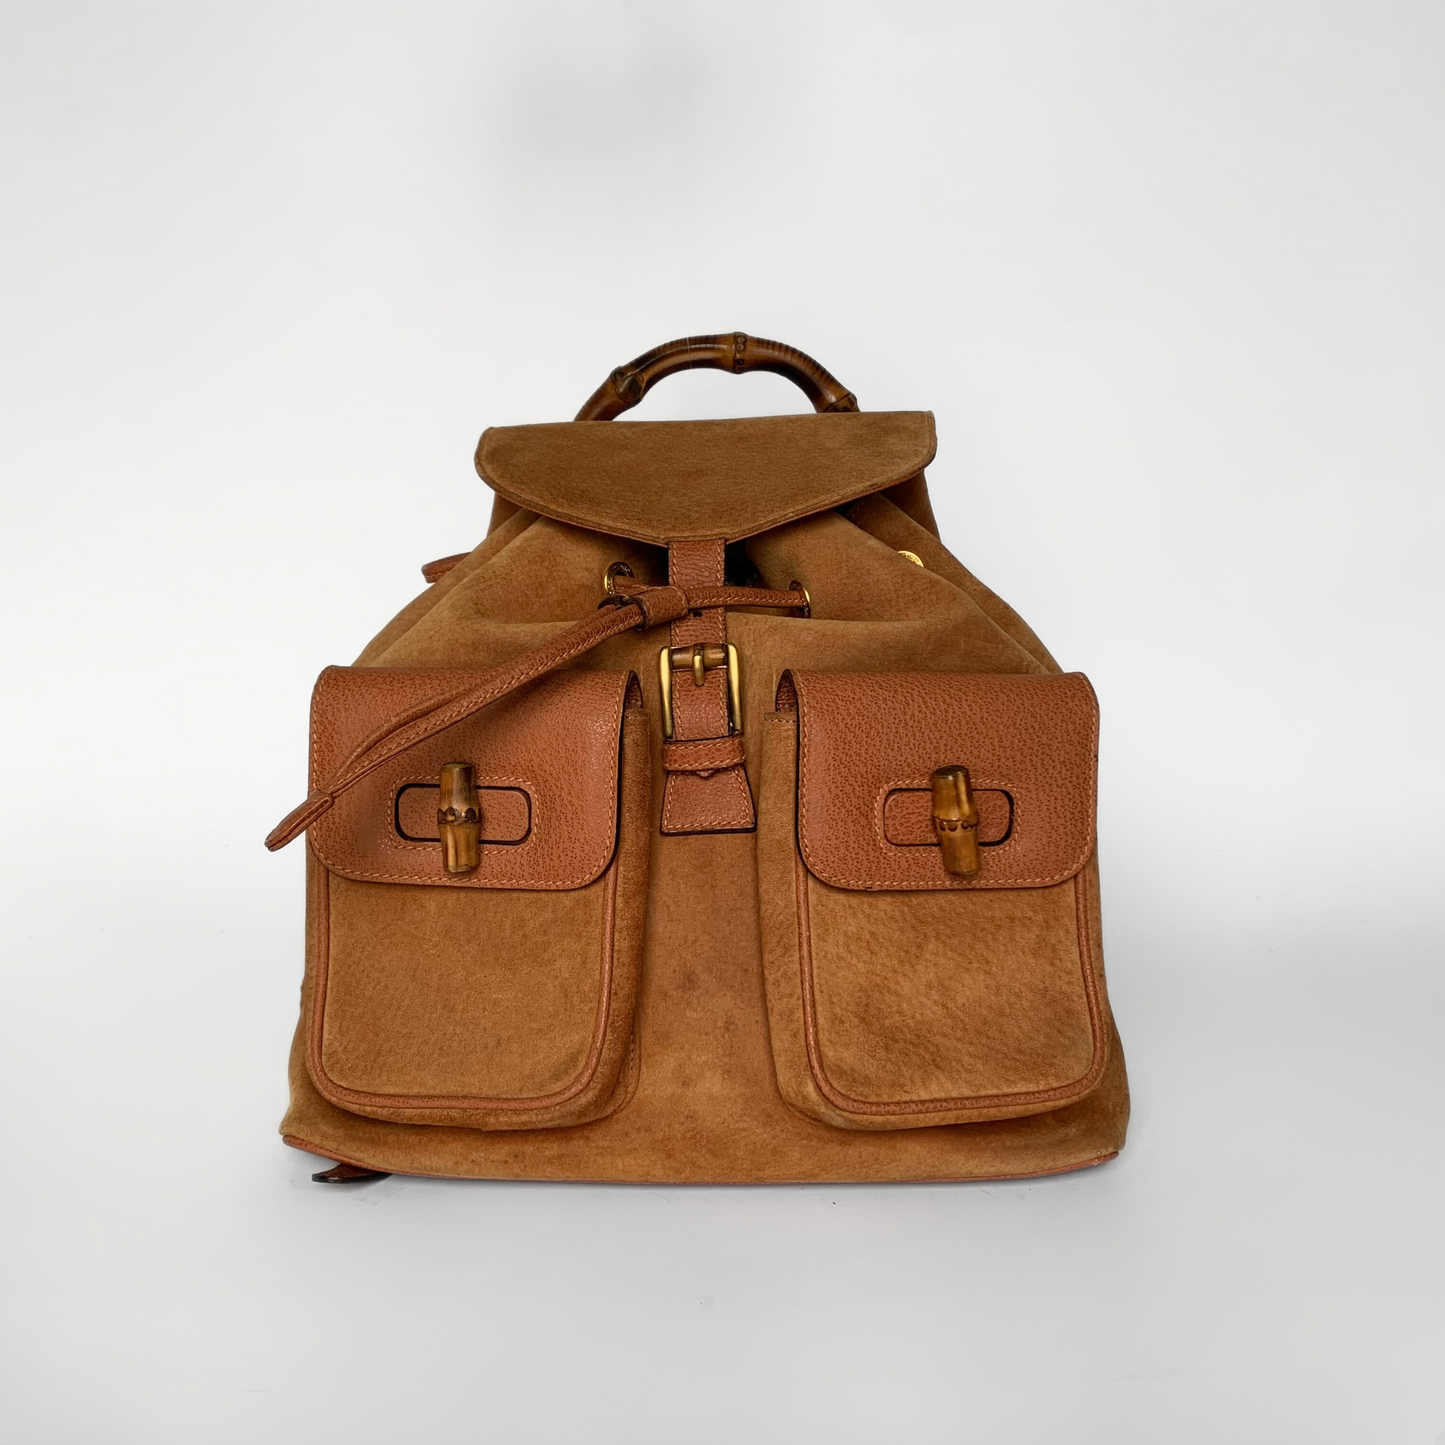 Gucci Gucci Bamboo Backpack Suède - Ryggsekker - Etoile Luxury Vintage